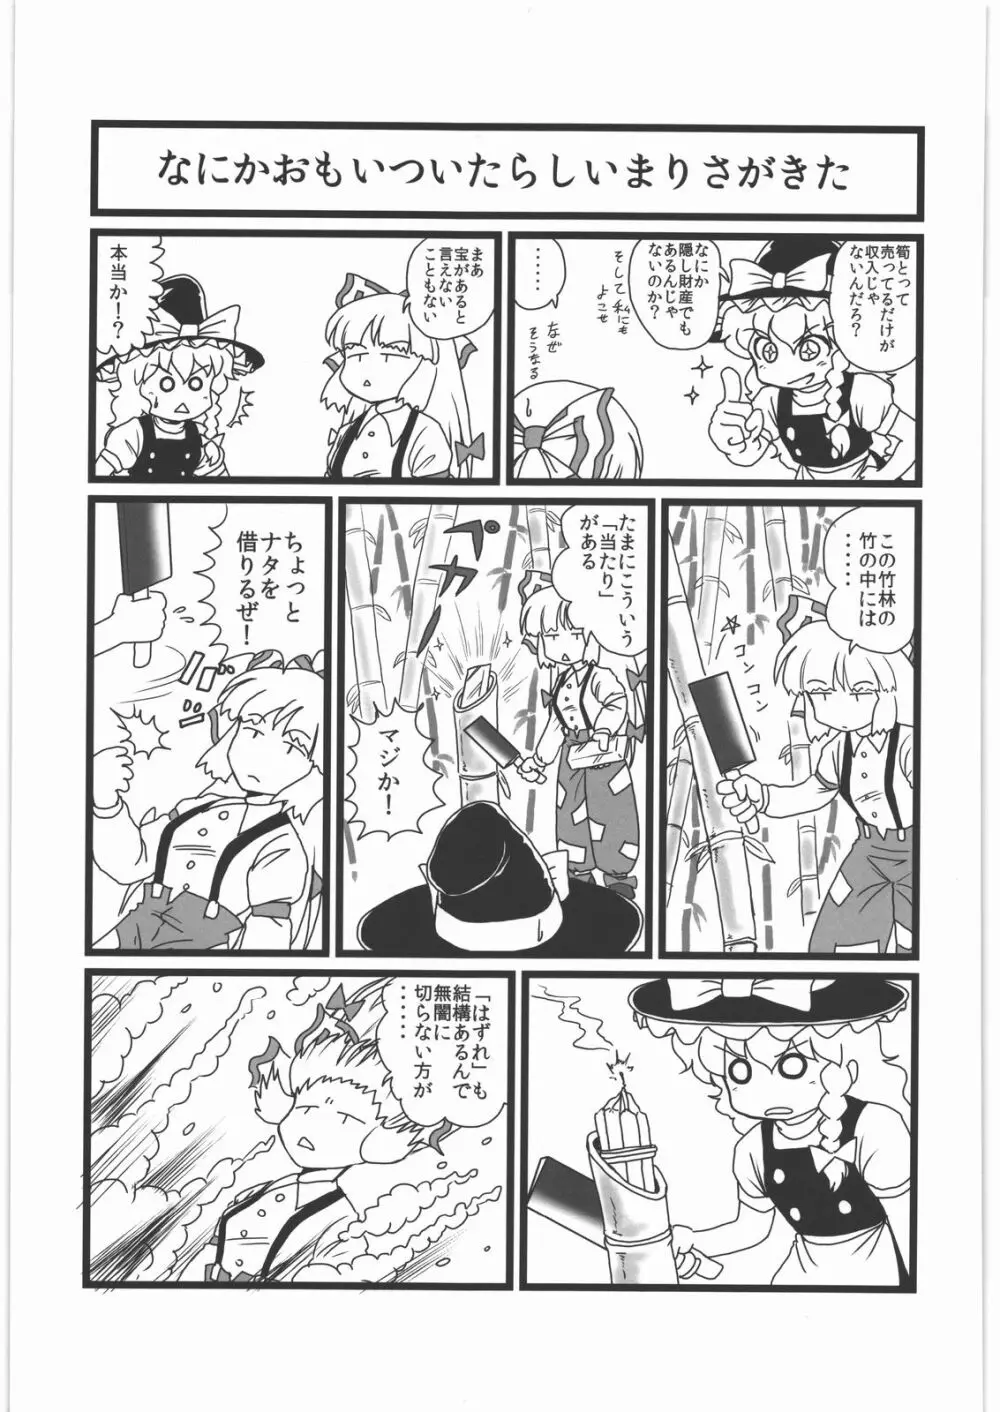 甲冑通信 弐之號 Page.48